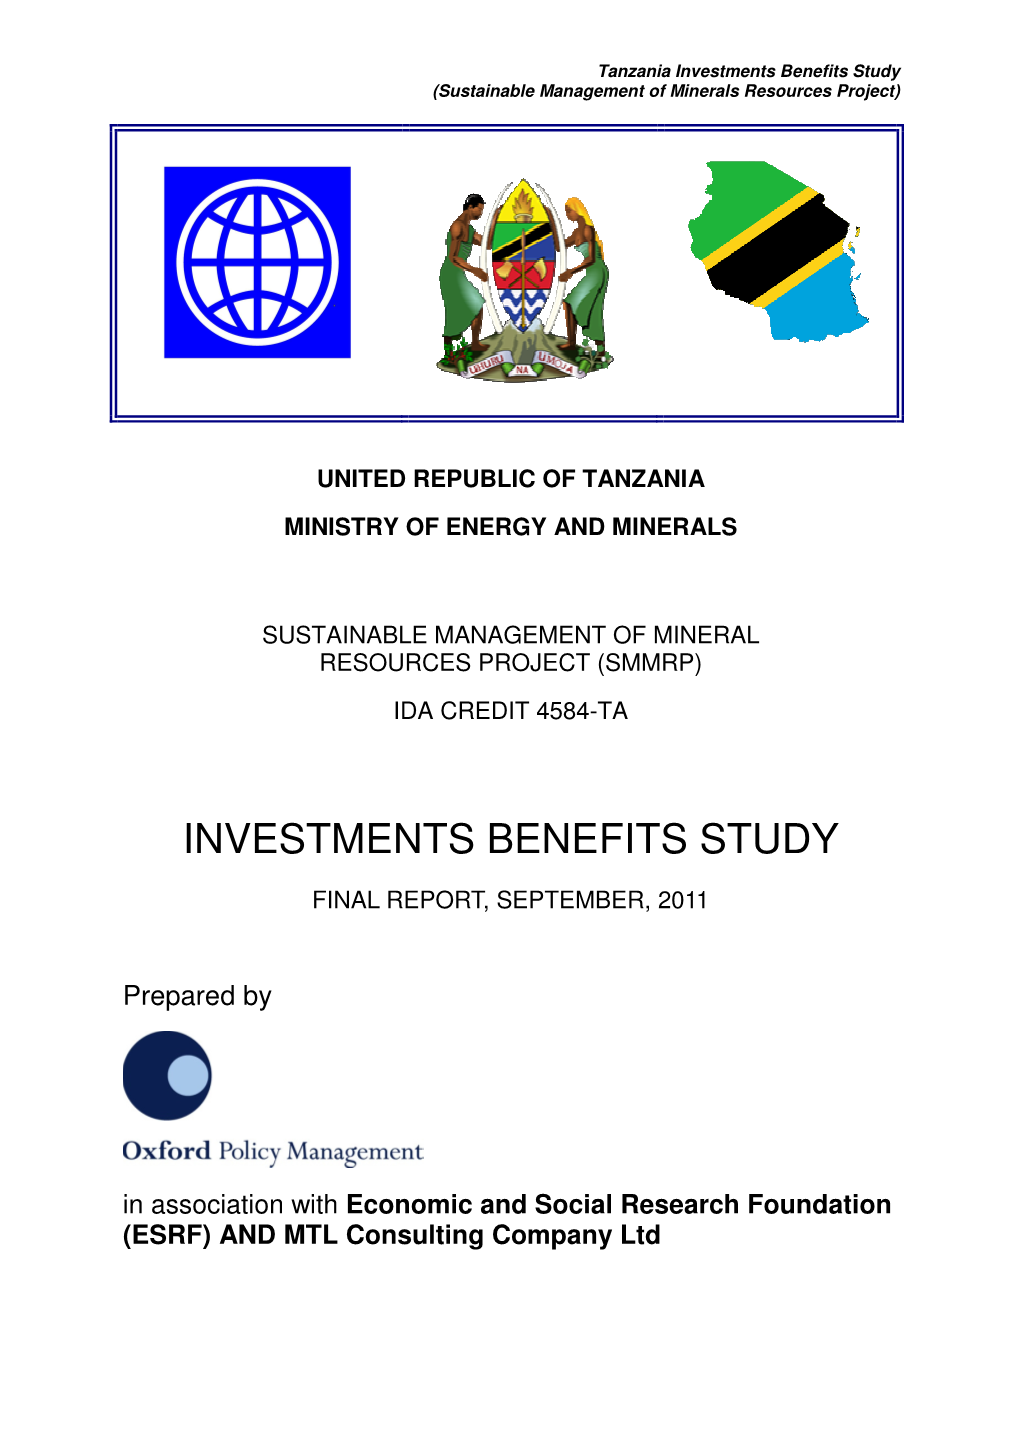 Investments Benefits Study (Sustainable Management of Minerals Resources Project)